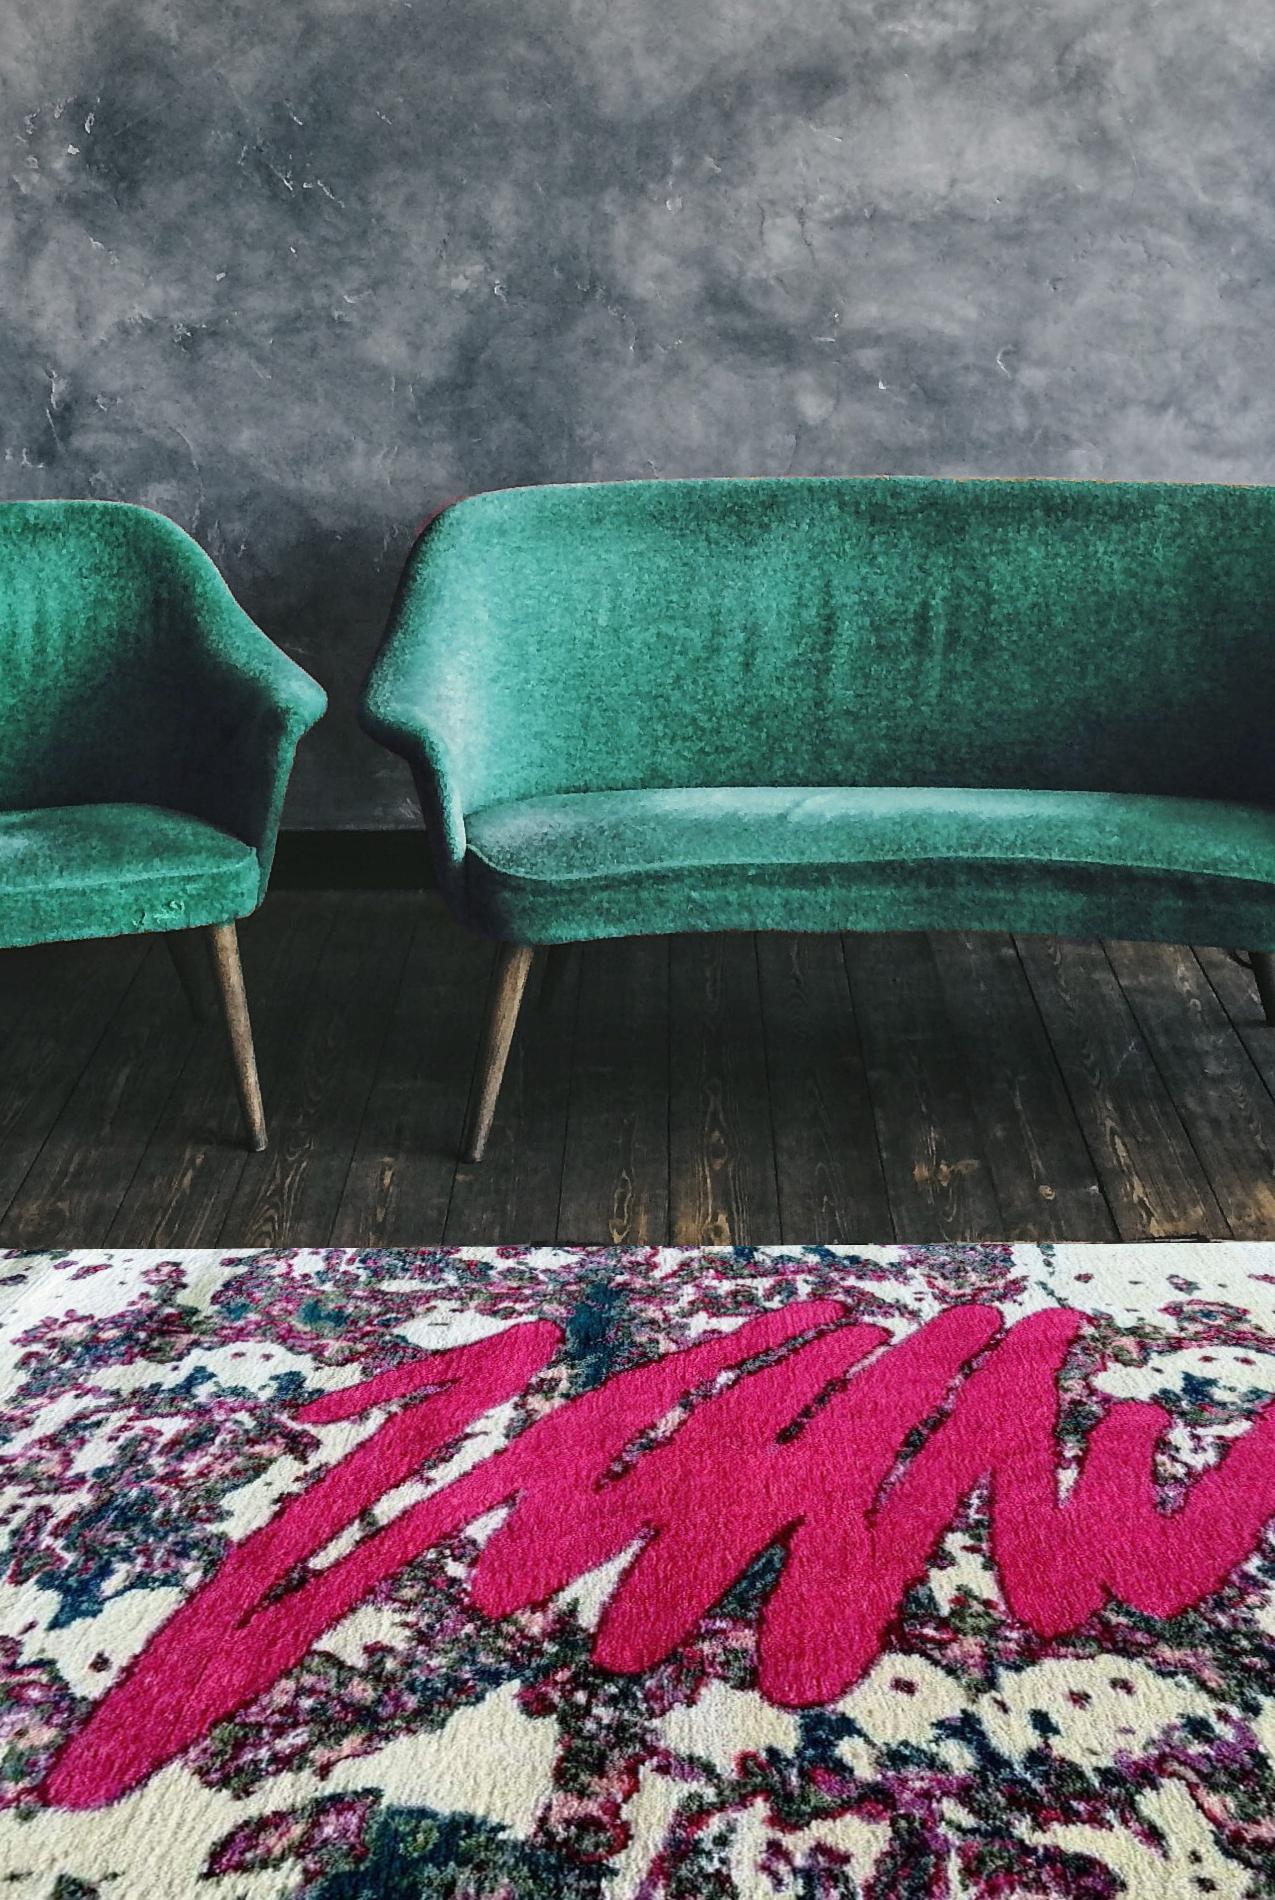 YEAH by RANKIN RUGS - traditionally handknotted in Bulgaria using 100% locally-sourced Bulgarian wool (~125,000 knots per sqm)

All rugs are handknotted in a small family-run workshop in Bulgaria by Europe's last remaining artisans practising